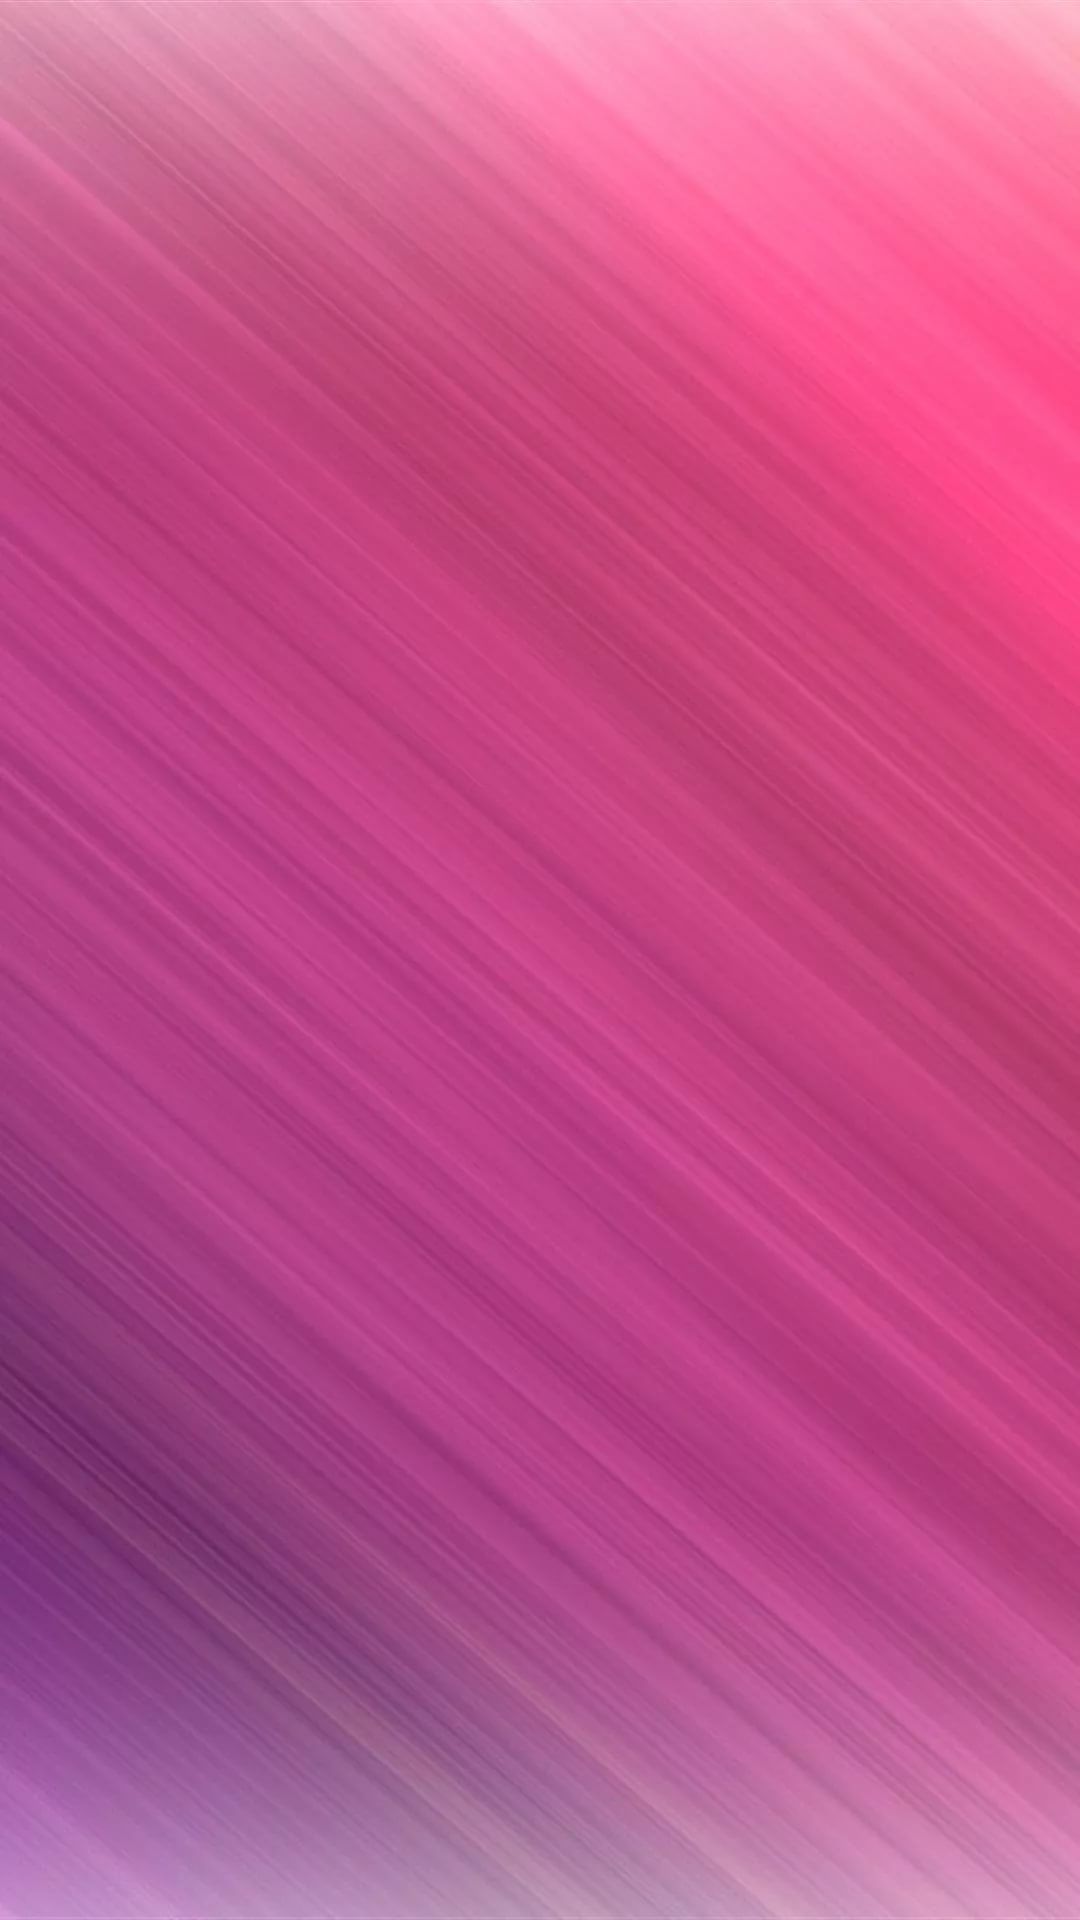 Solid Pink wallpaper for android